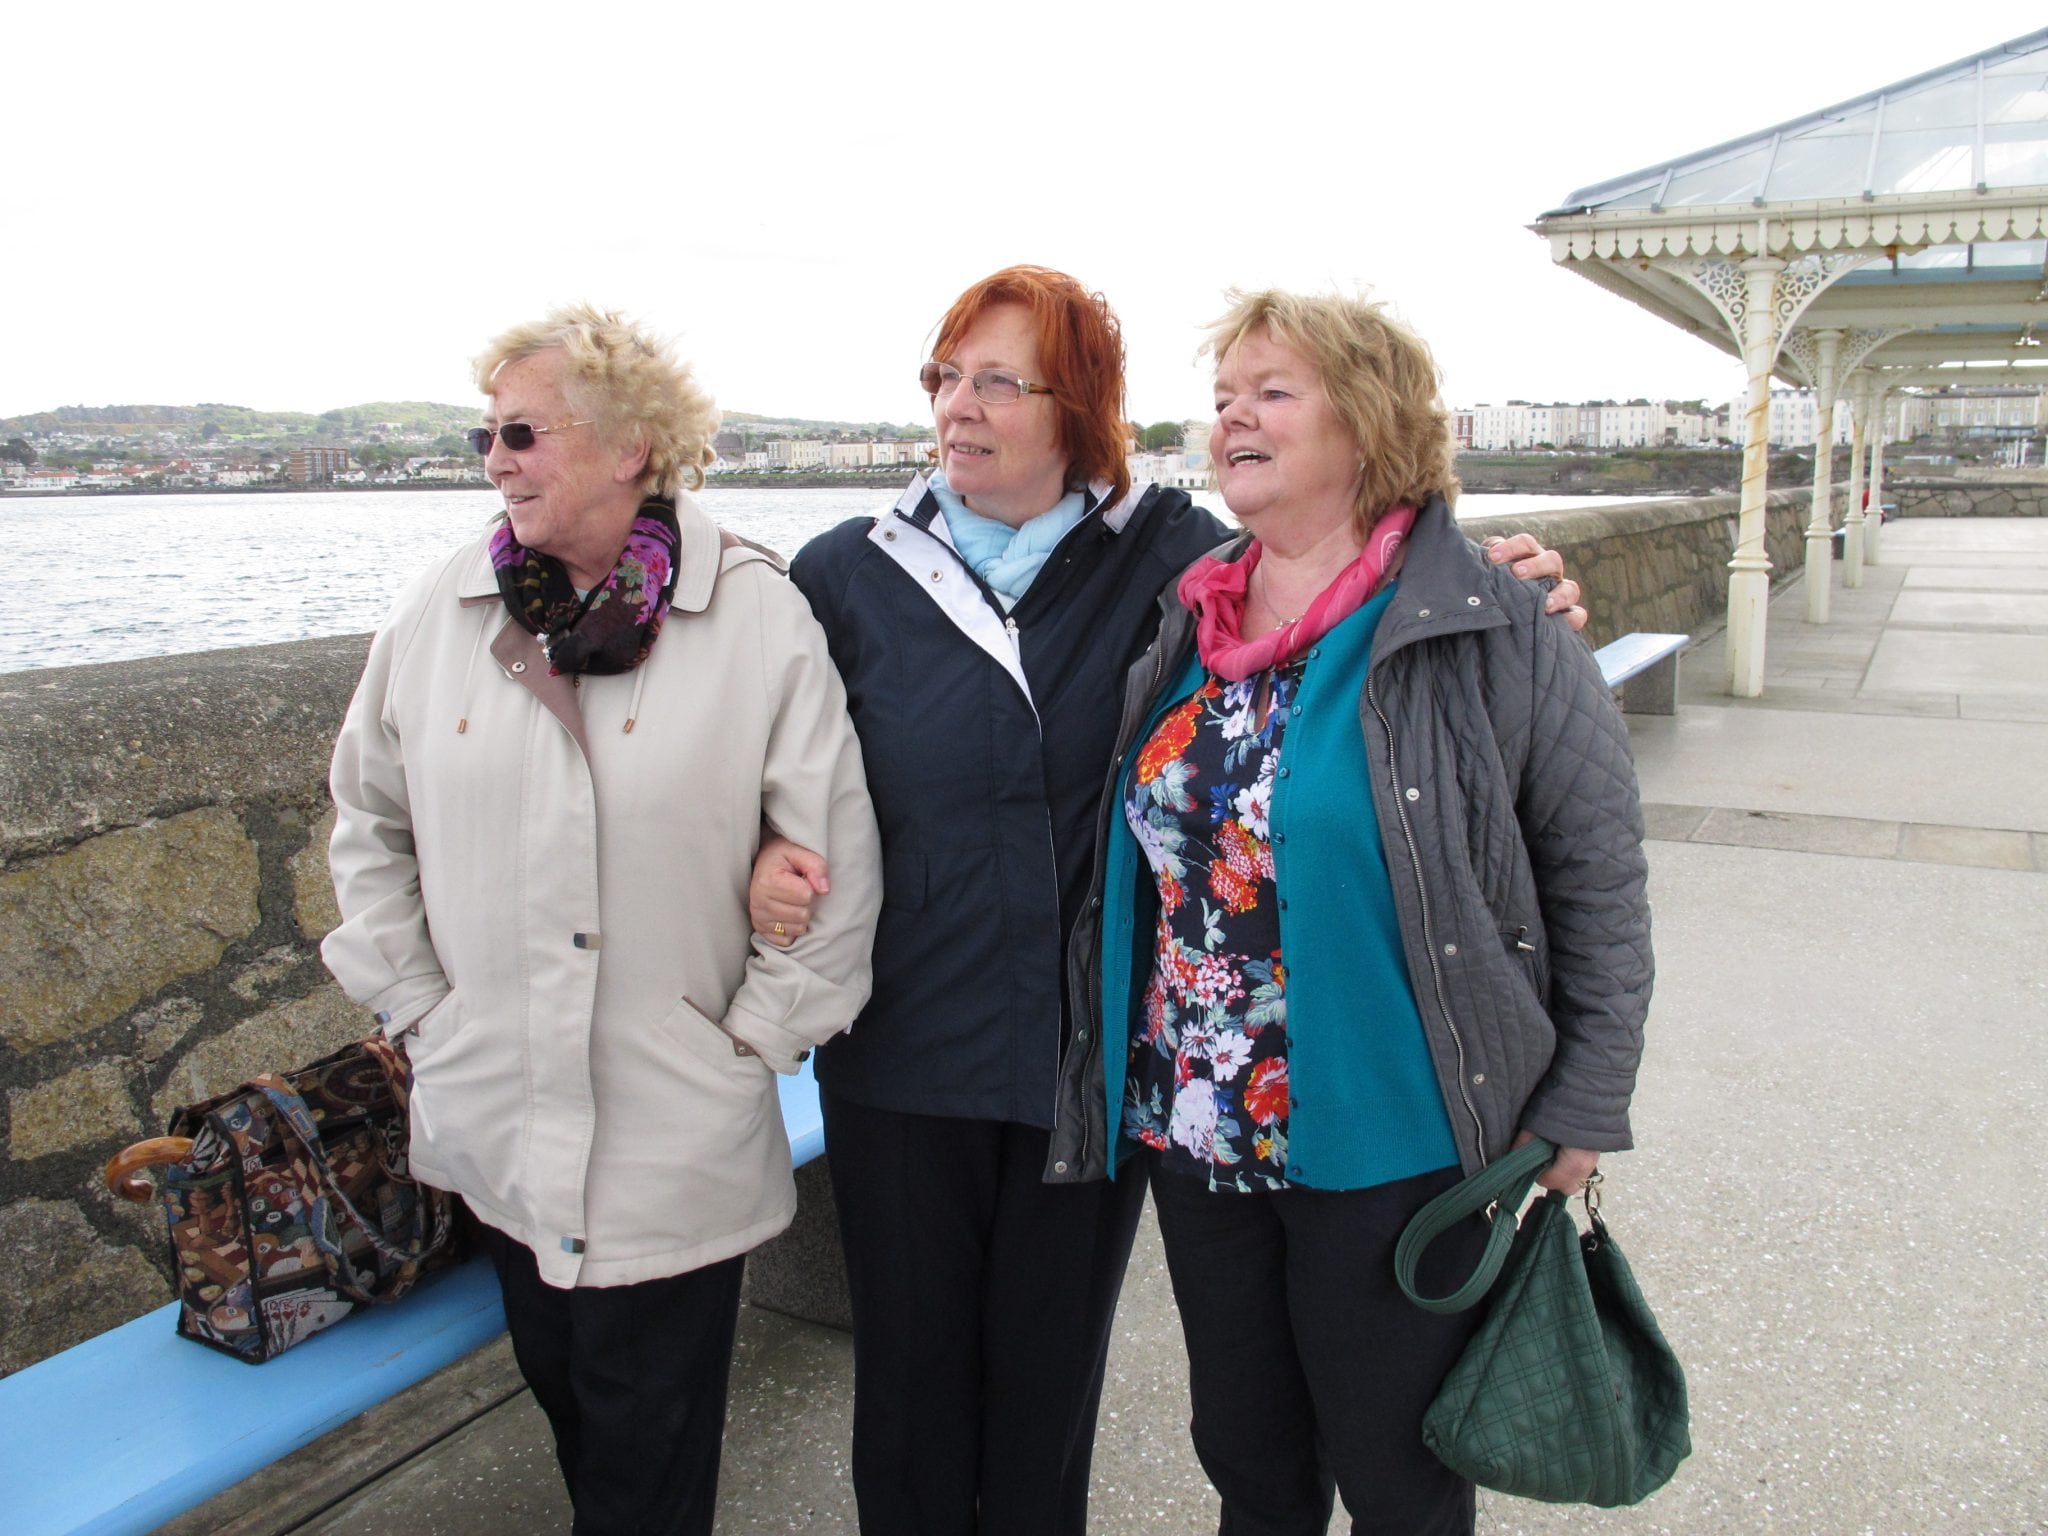 In this May 13, 2013 photo, Marie Theresa Gill, center, poses with her friends Kathleen Greenhough, right, and Mary Murray at the pier in Dun Laoghaire in Dublin Co., after a wreath-laying ceremony to honor the so-called "Forgotten Irish" the thousands of young Irish who emigrated to Britain during the 1950s and 1960s. 